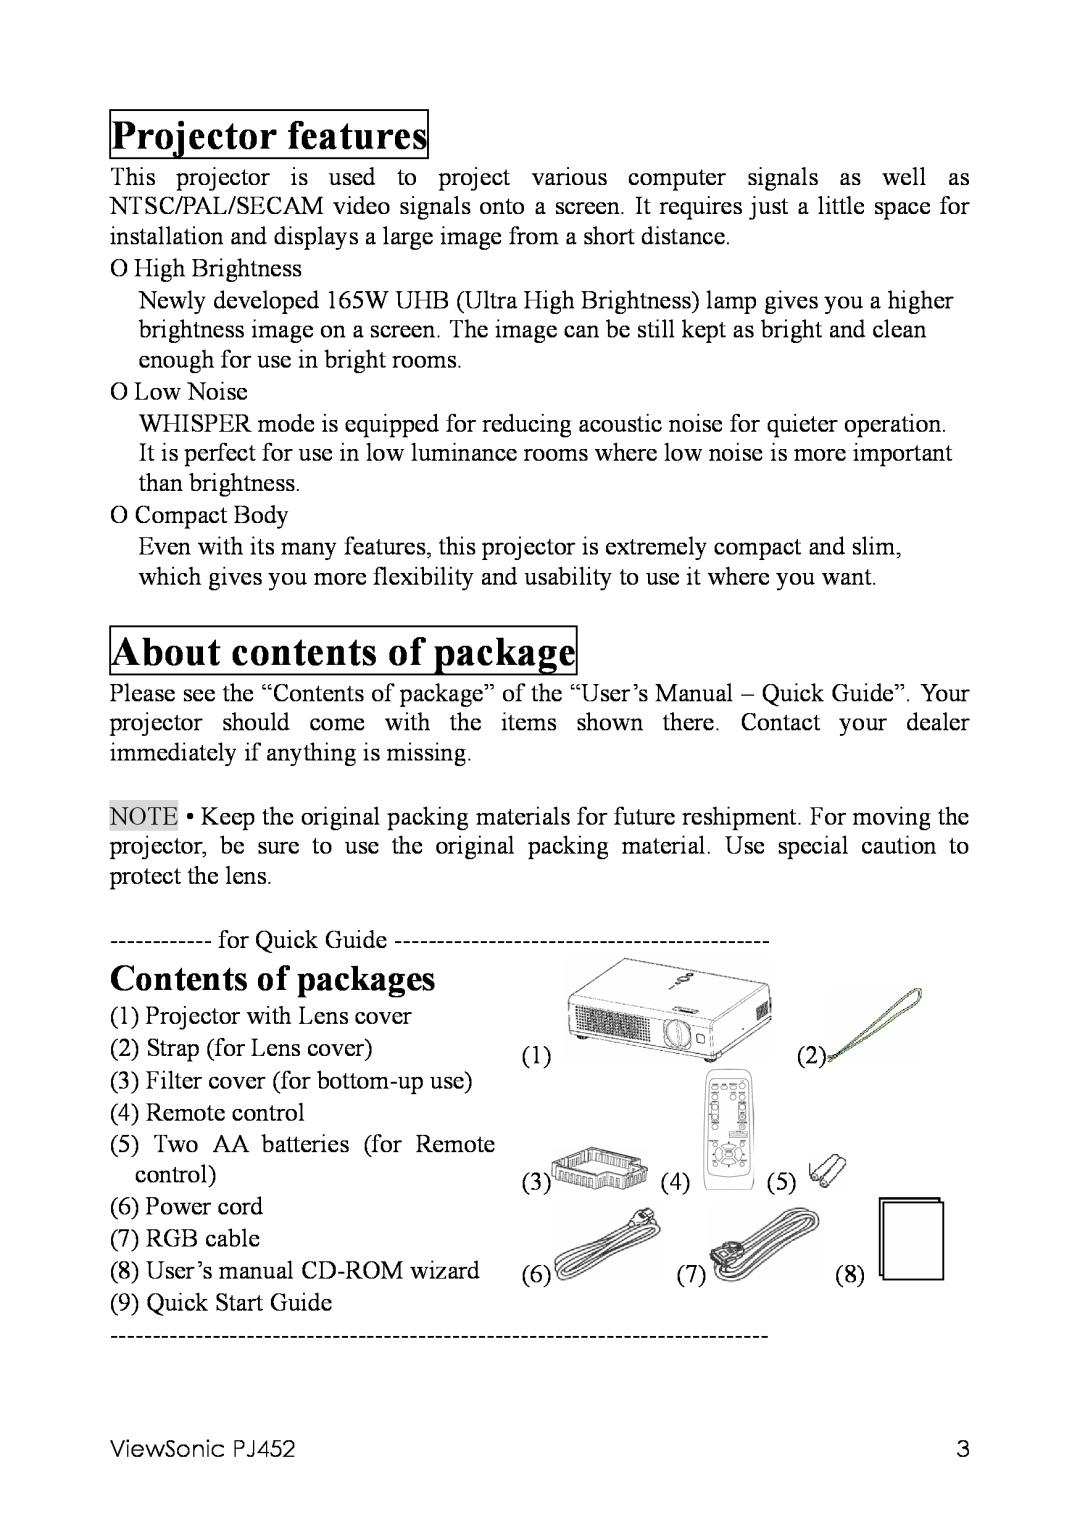 ViewSonic PJ452 manual Projector features, About contents of package, Contents of packages 